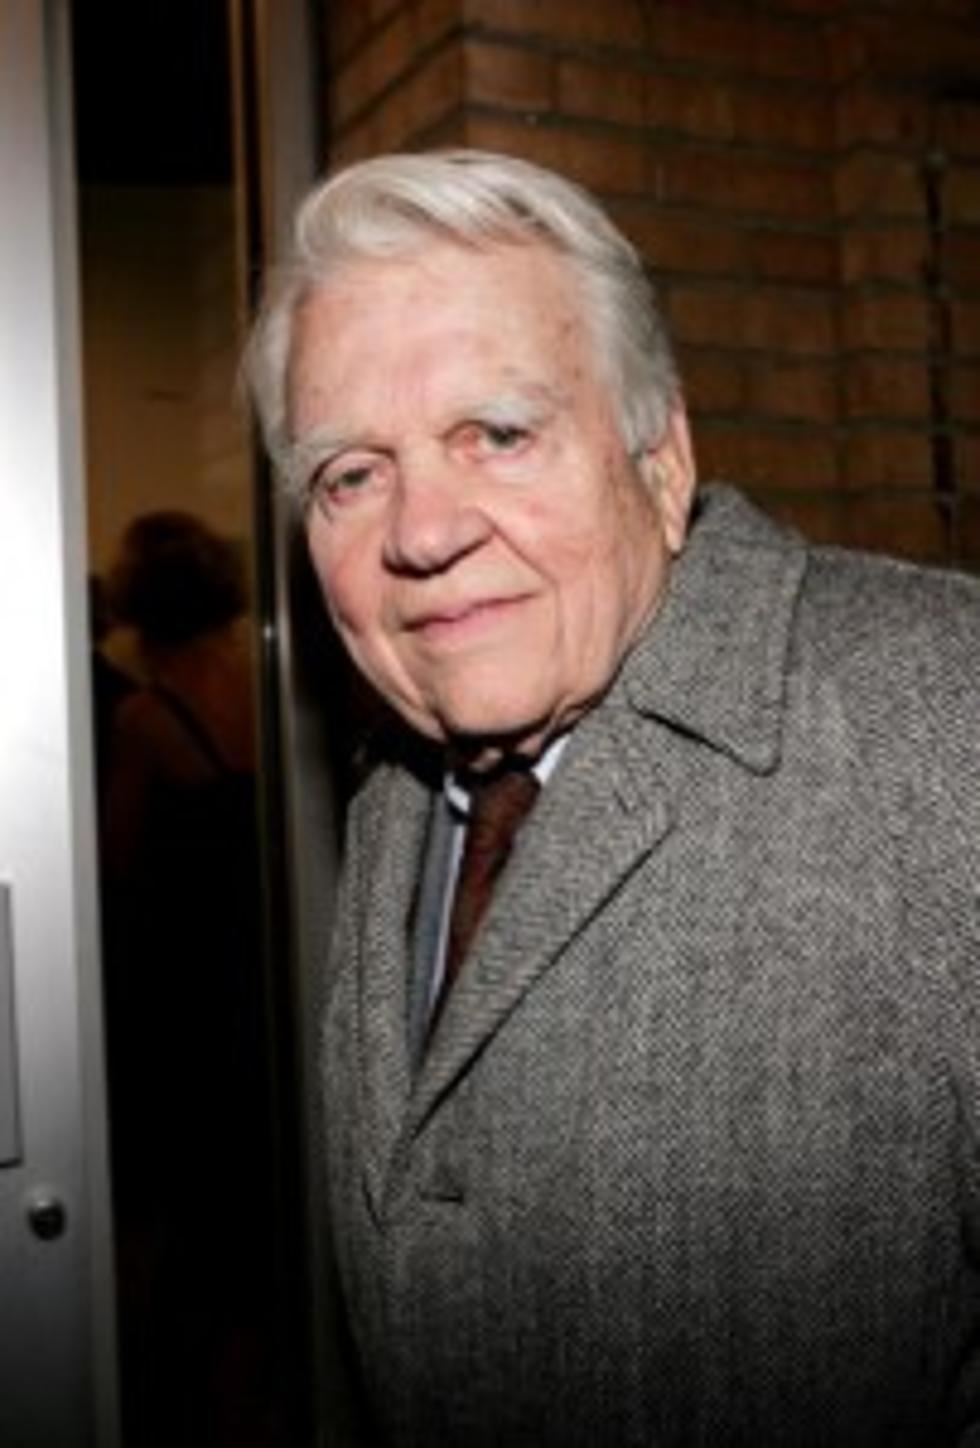 Andy Rooney Dead At 92; Watch His Final Commentary [VIDEO]